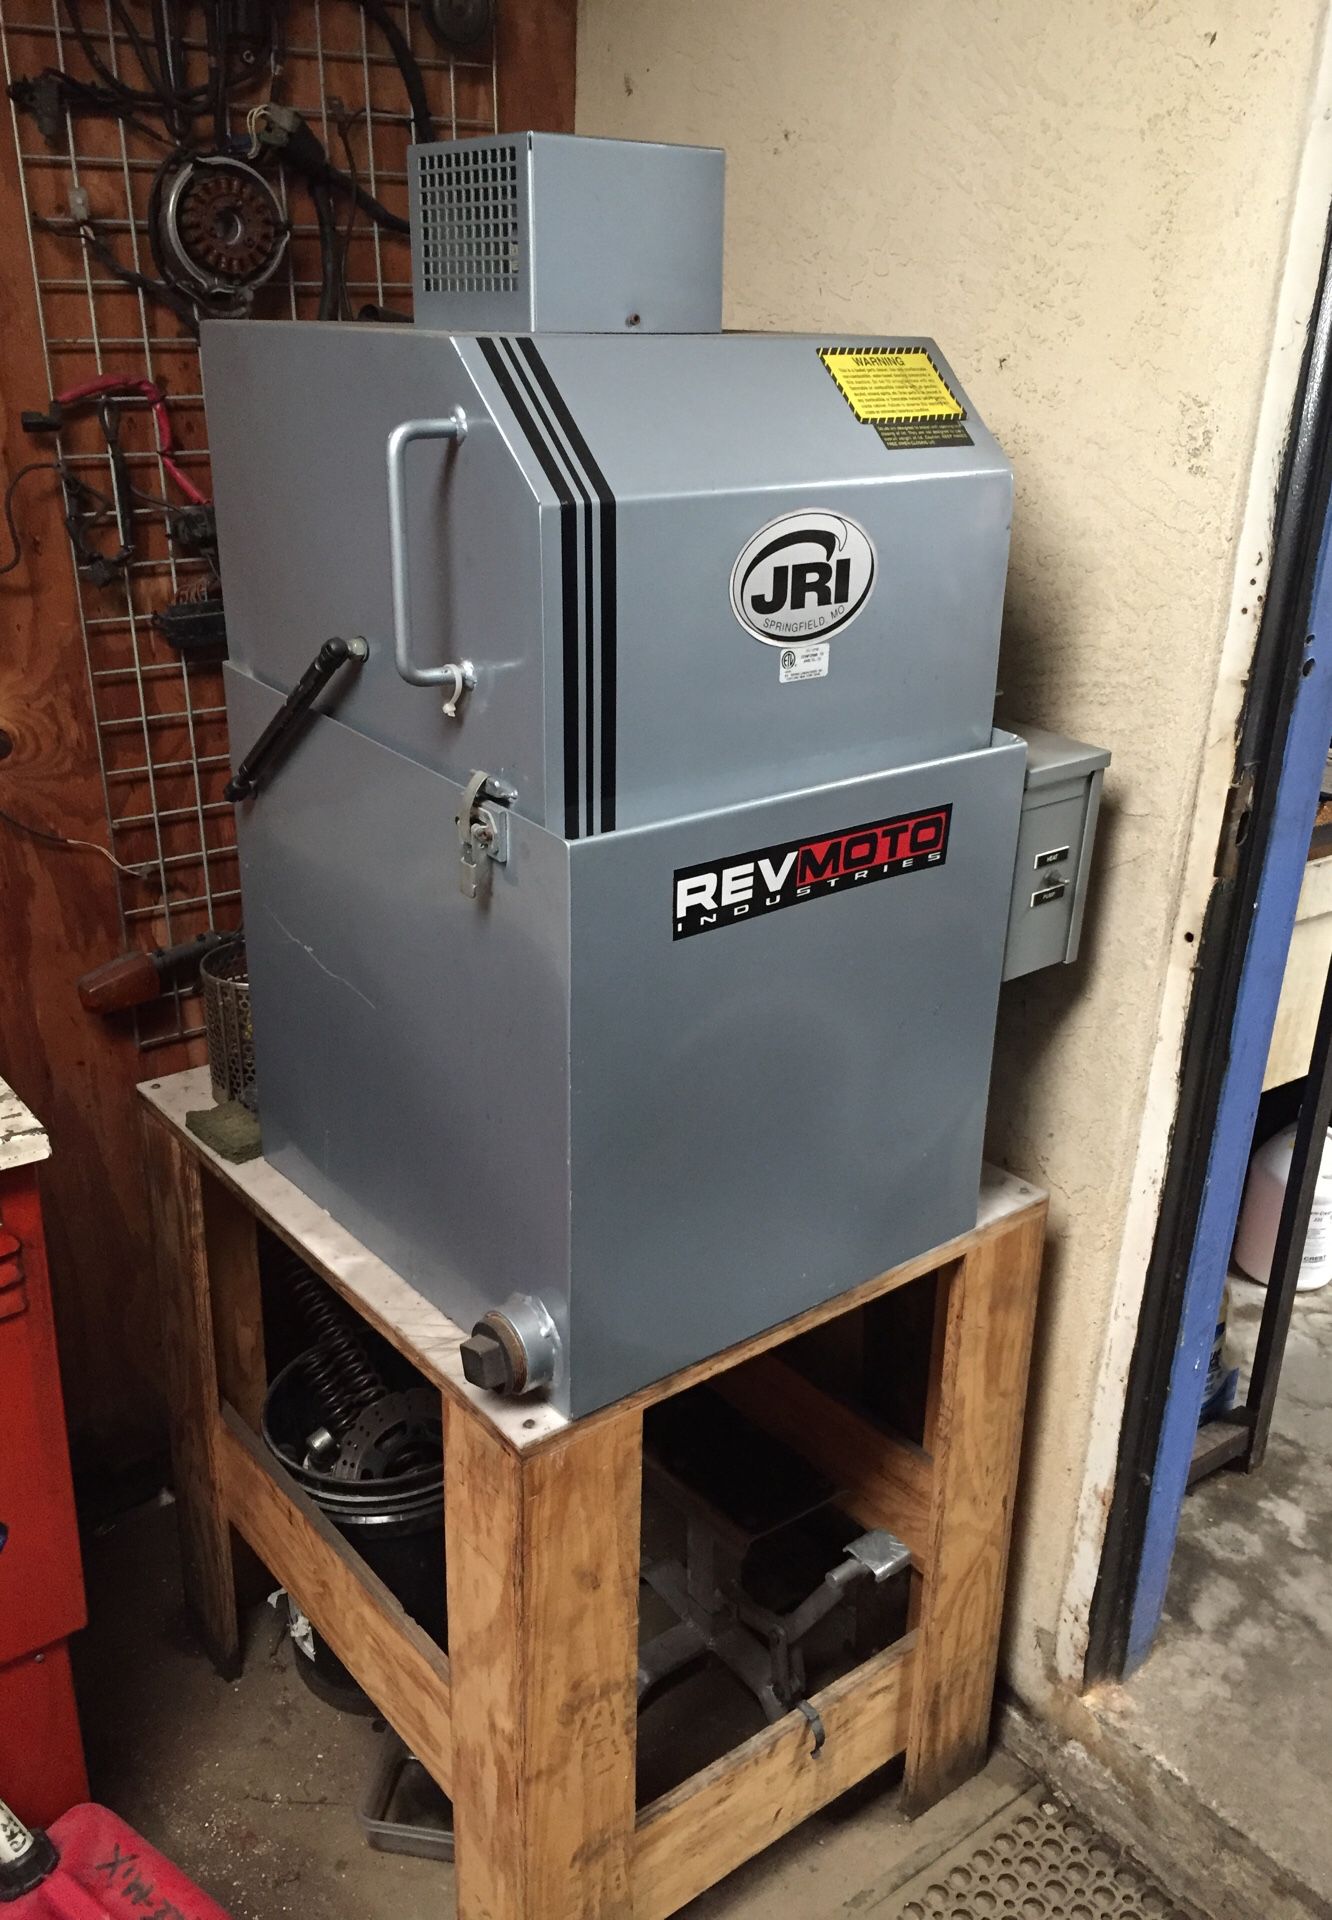 JRI parts washer w/stand